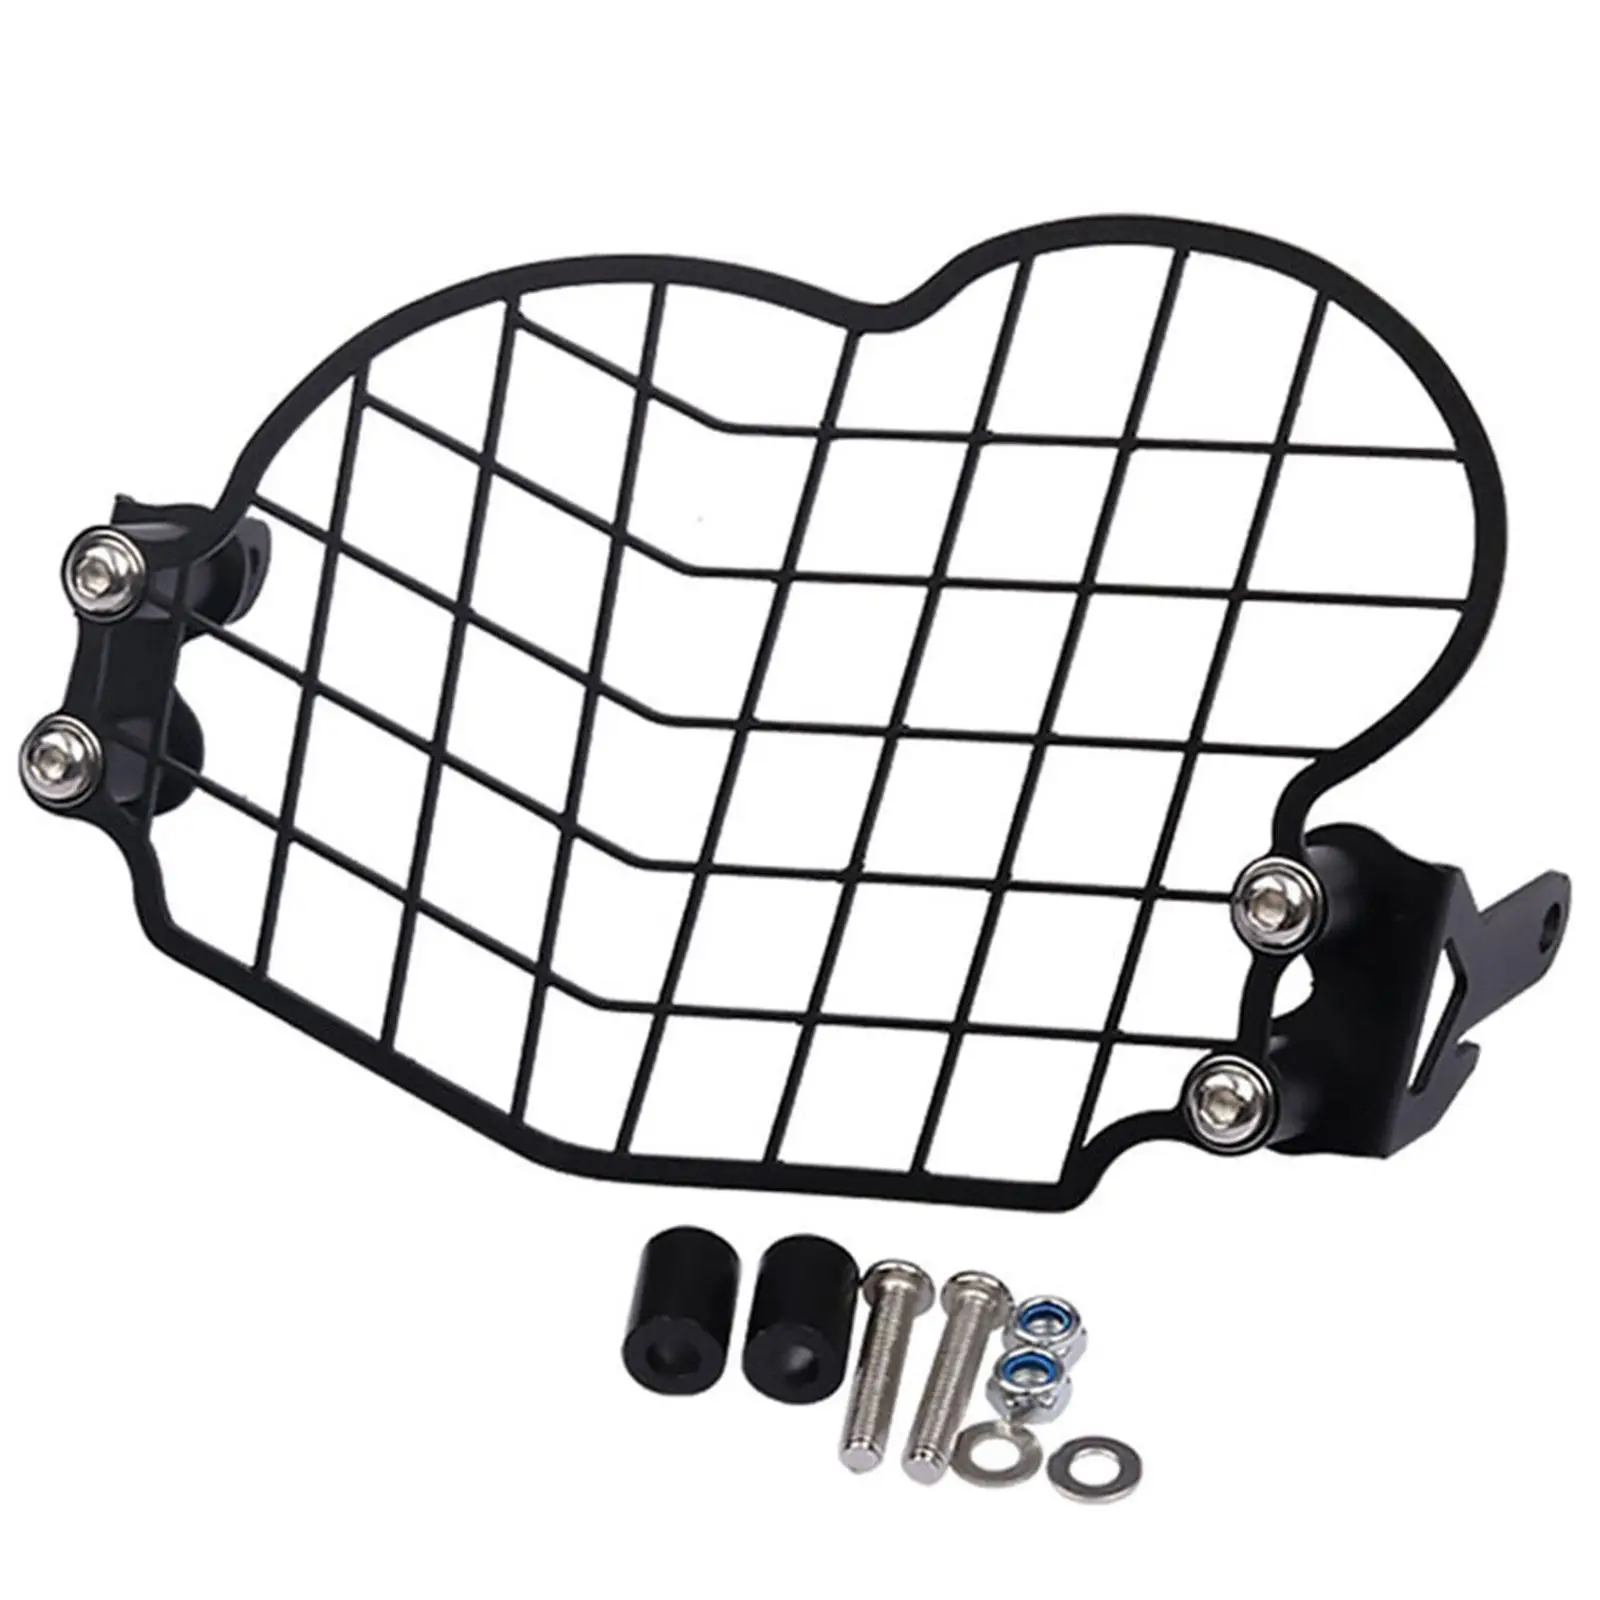 Headlight Guard Protector Headlight Protector Grille for BMW G650GS